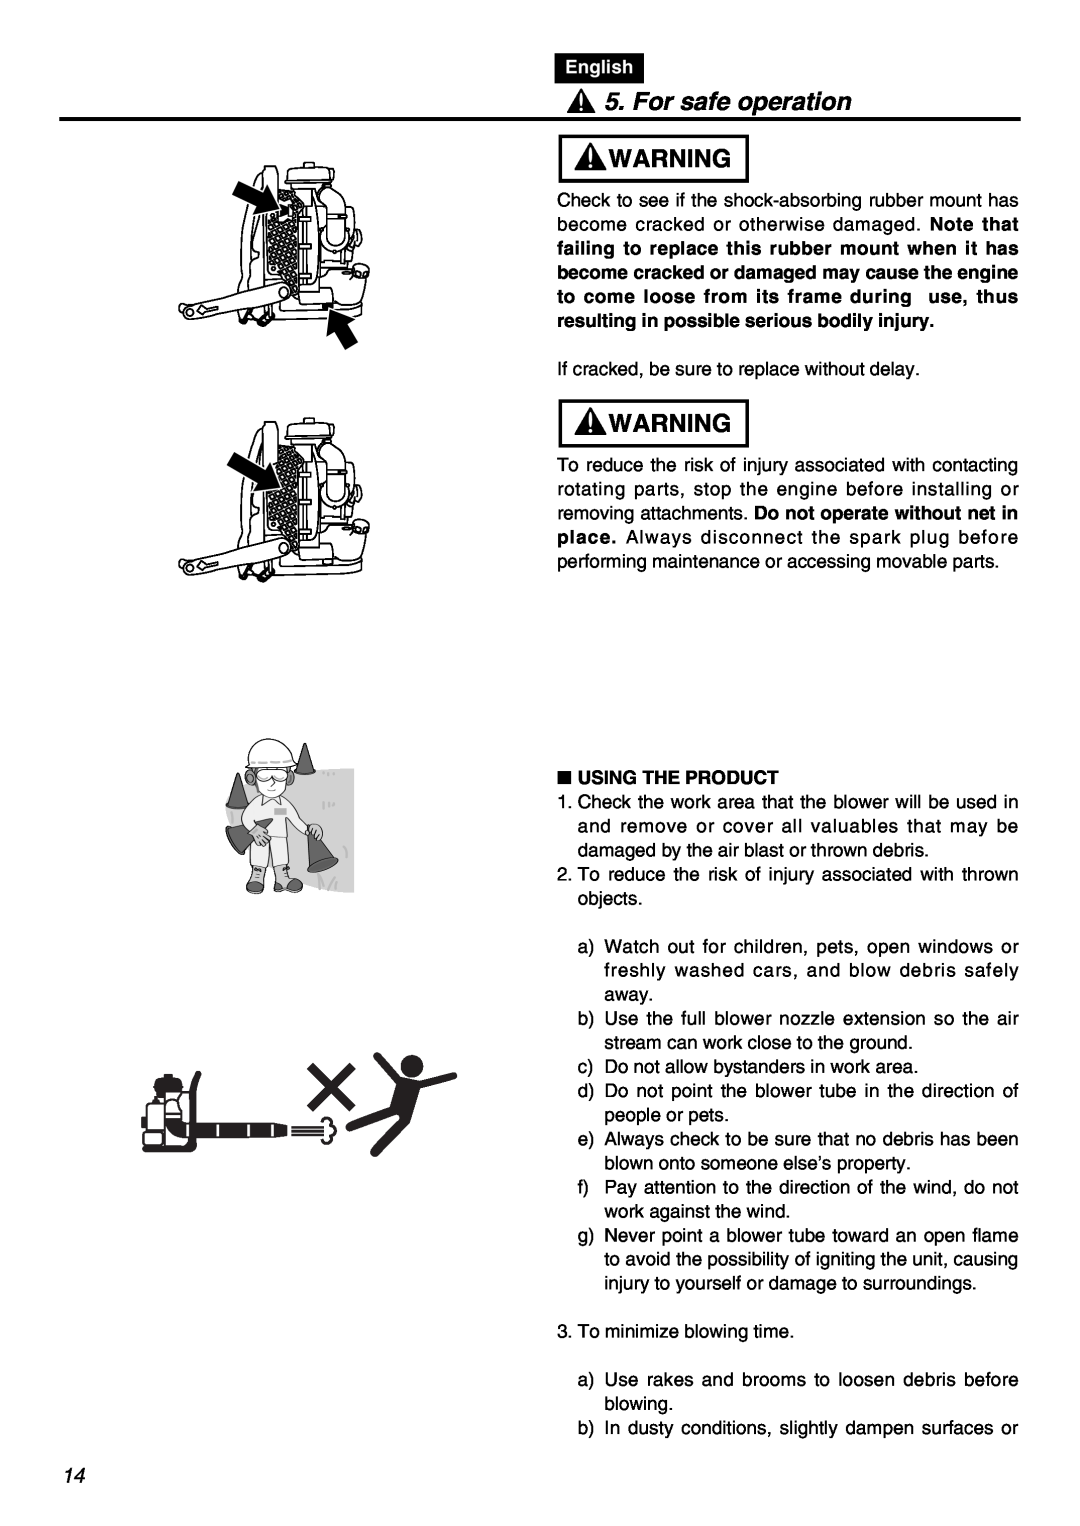 RedMax EBZ8001RH manual For safe operation, English, Using The Product 